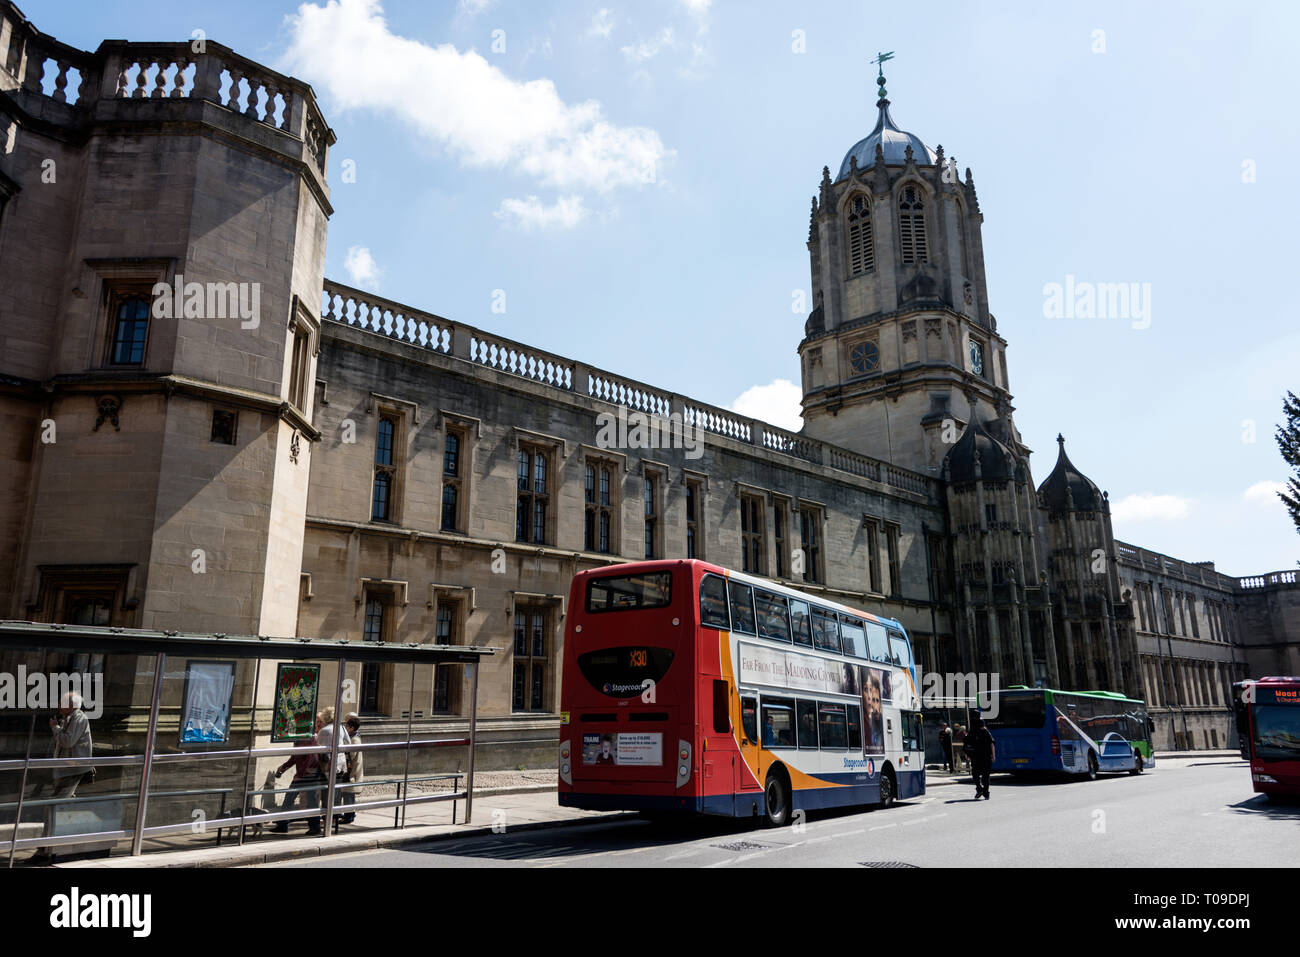 Christ Church college and the Tom Tower on St. Aldate's Street in Oxford, Oxfordshire,Britain Stock Photo